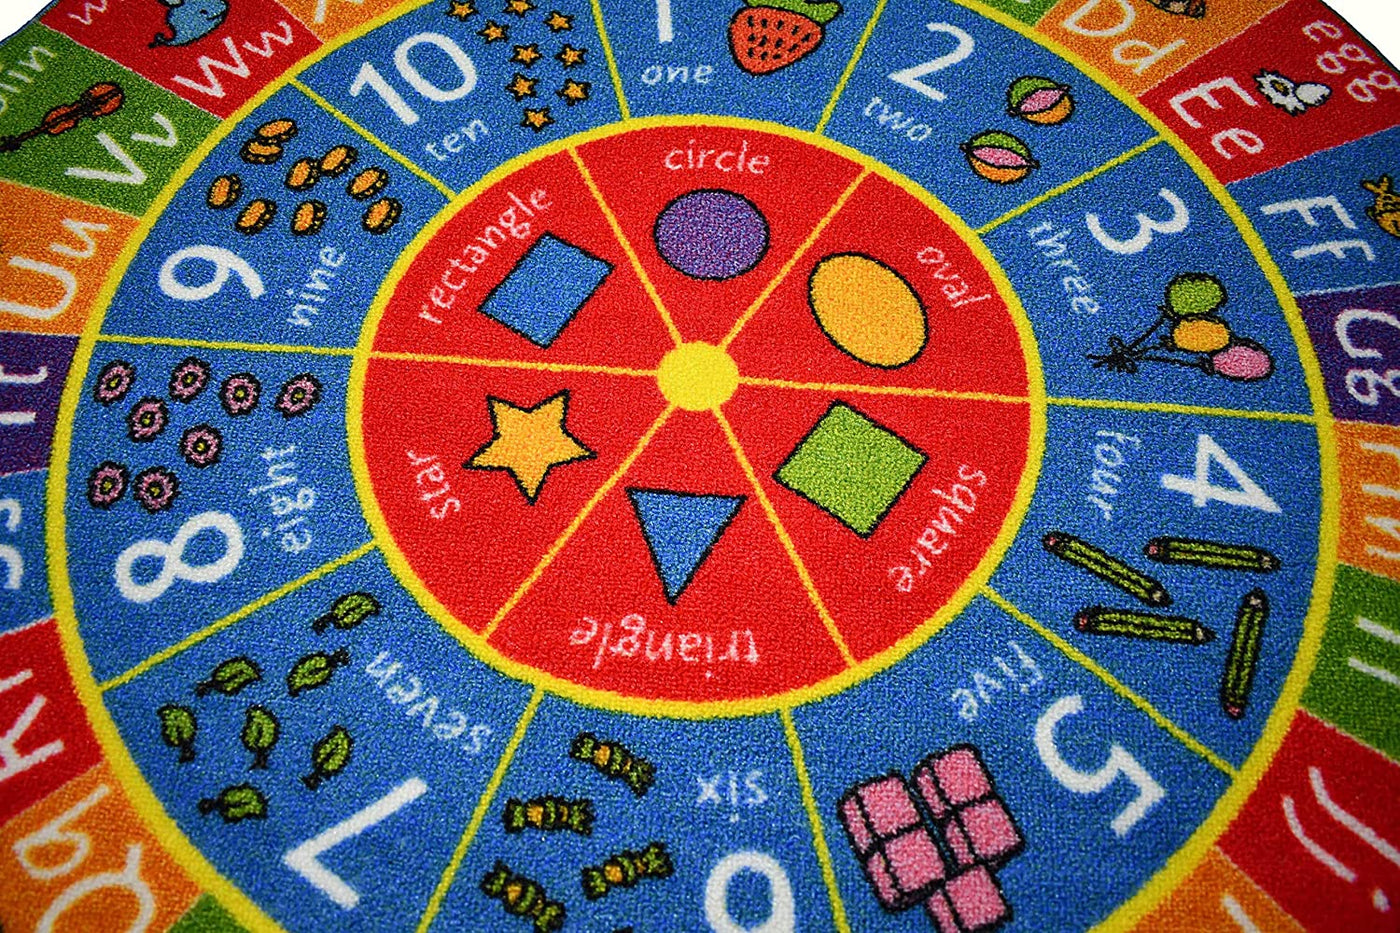 Kids Circle ABC Numbers Shapes Rug - KC Cubs